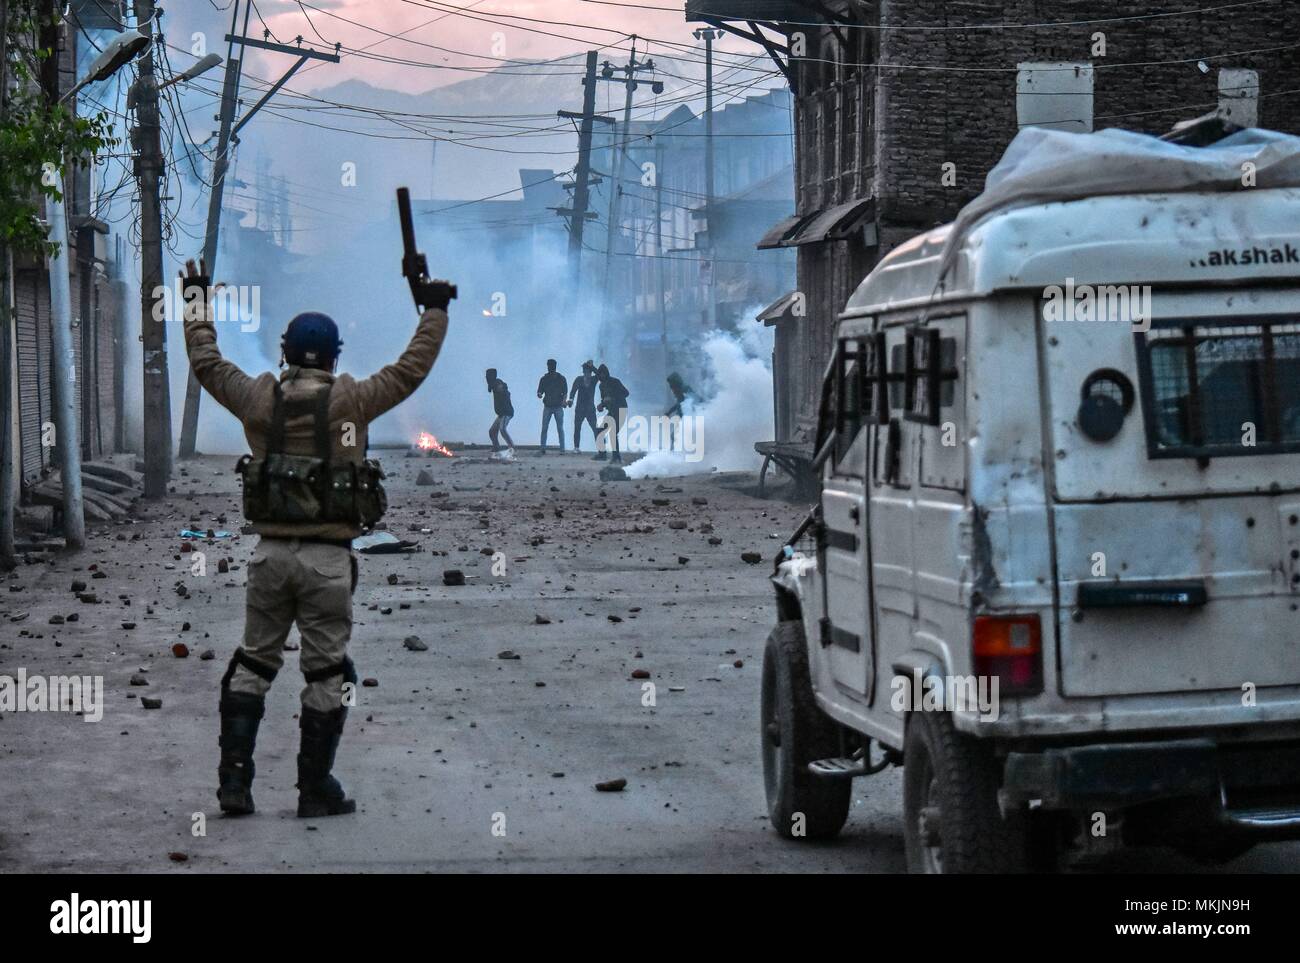 Srinagar, Kashmir. 8th May 2018. An policeman taunts Kashmiri protesters during clashes in Srinagar, Kashmir. Fierce clashes broke out between government forces and Kashmiri protesters in Srinagar on Tuesday as the valley continued to remain tense over the killing of 11 people including 5 militants and 6 civilians in Kashmir. Police used tear smoke shells and shot gun pellets to disperse hundreds of demonstrators who hurled rocks and chanted anti-and pro-freedom slogans. Credit: SOPA Images Limited/Alamy Live News Stock Photo